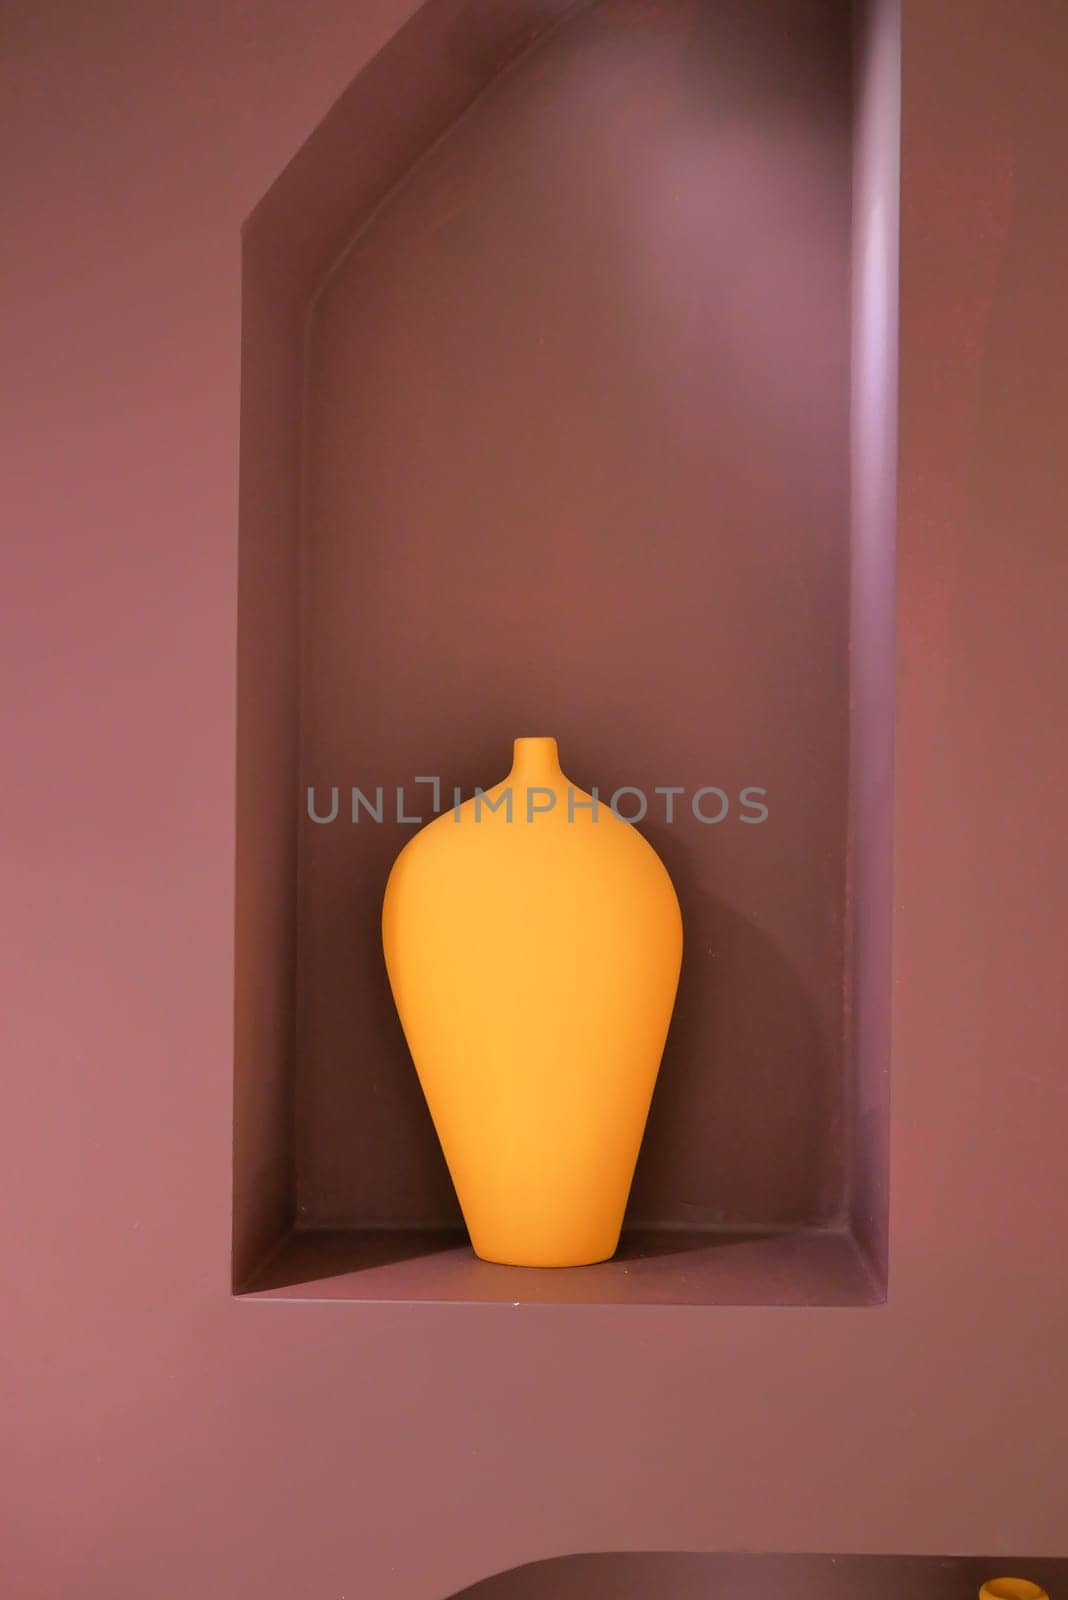 A wooden artifact, a yellow vase, sits in a niche on a purple wall,